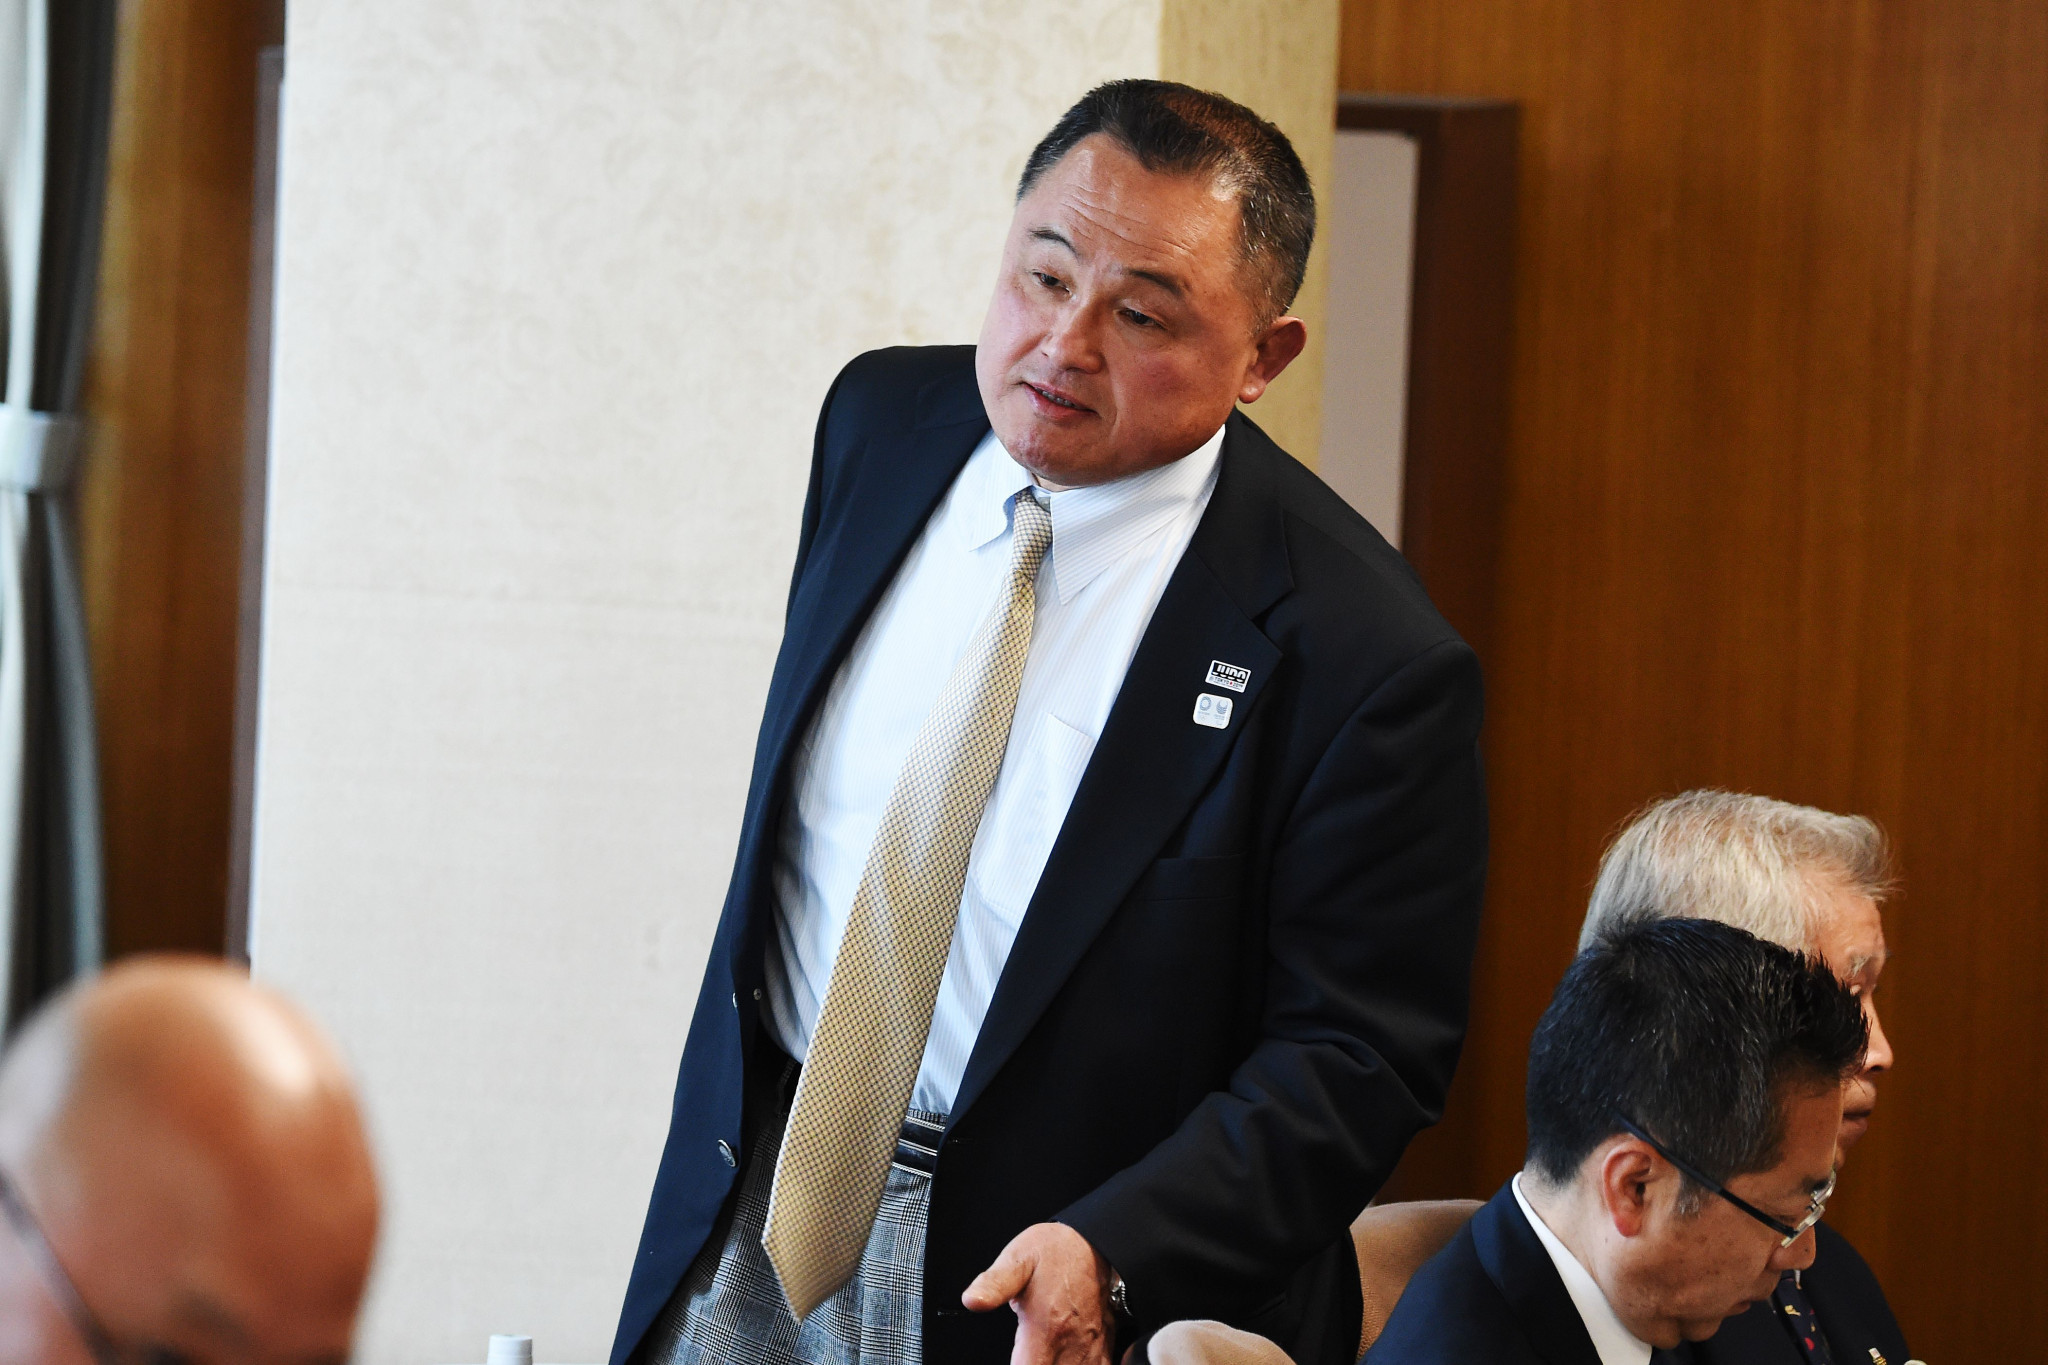 Yamashita set to be named new Japanese Olympic Committee President to replace Takeda